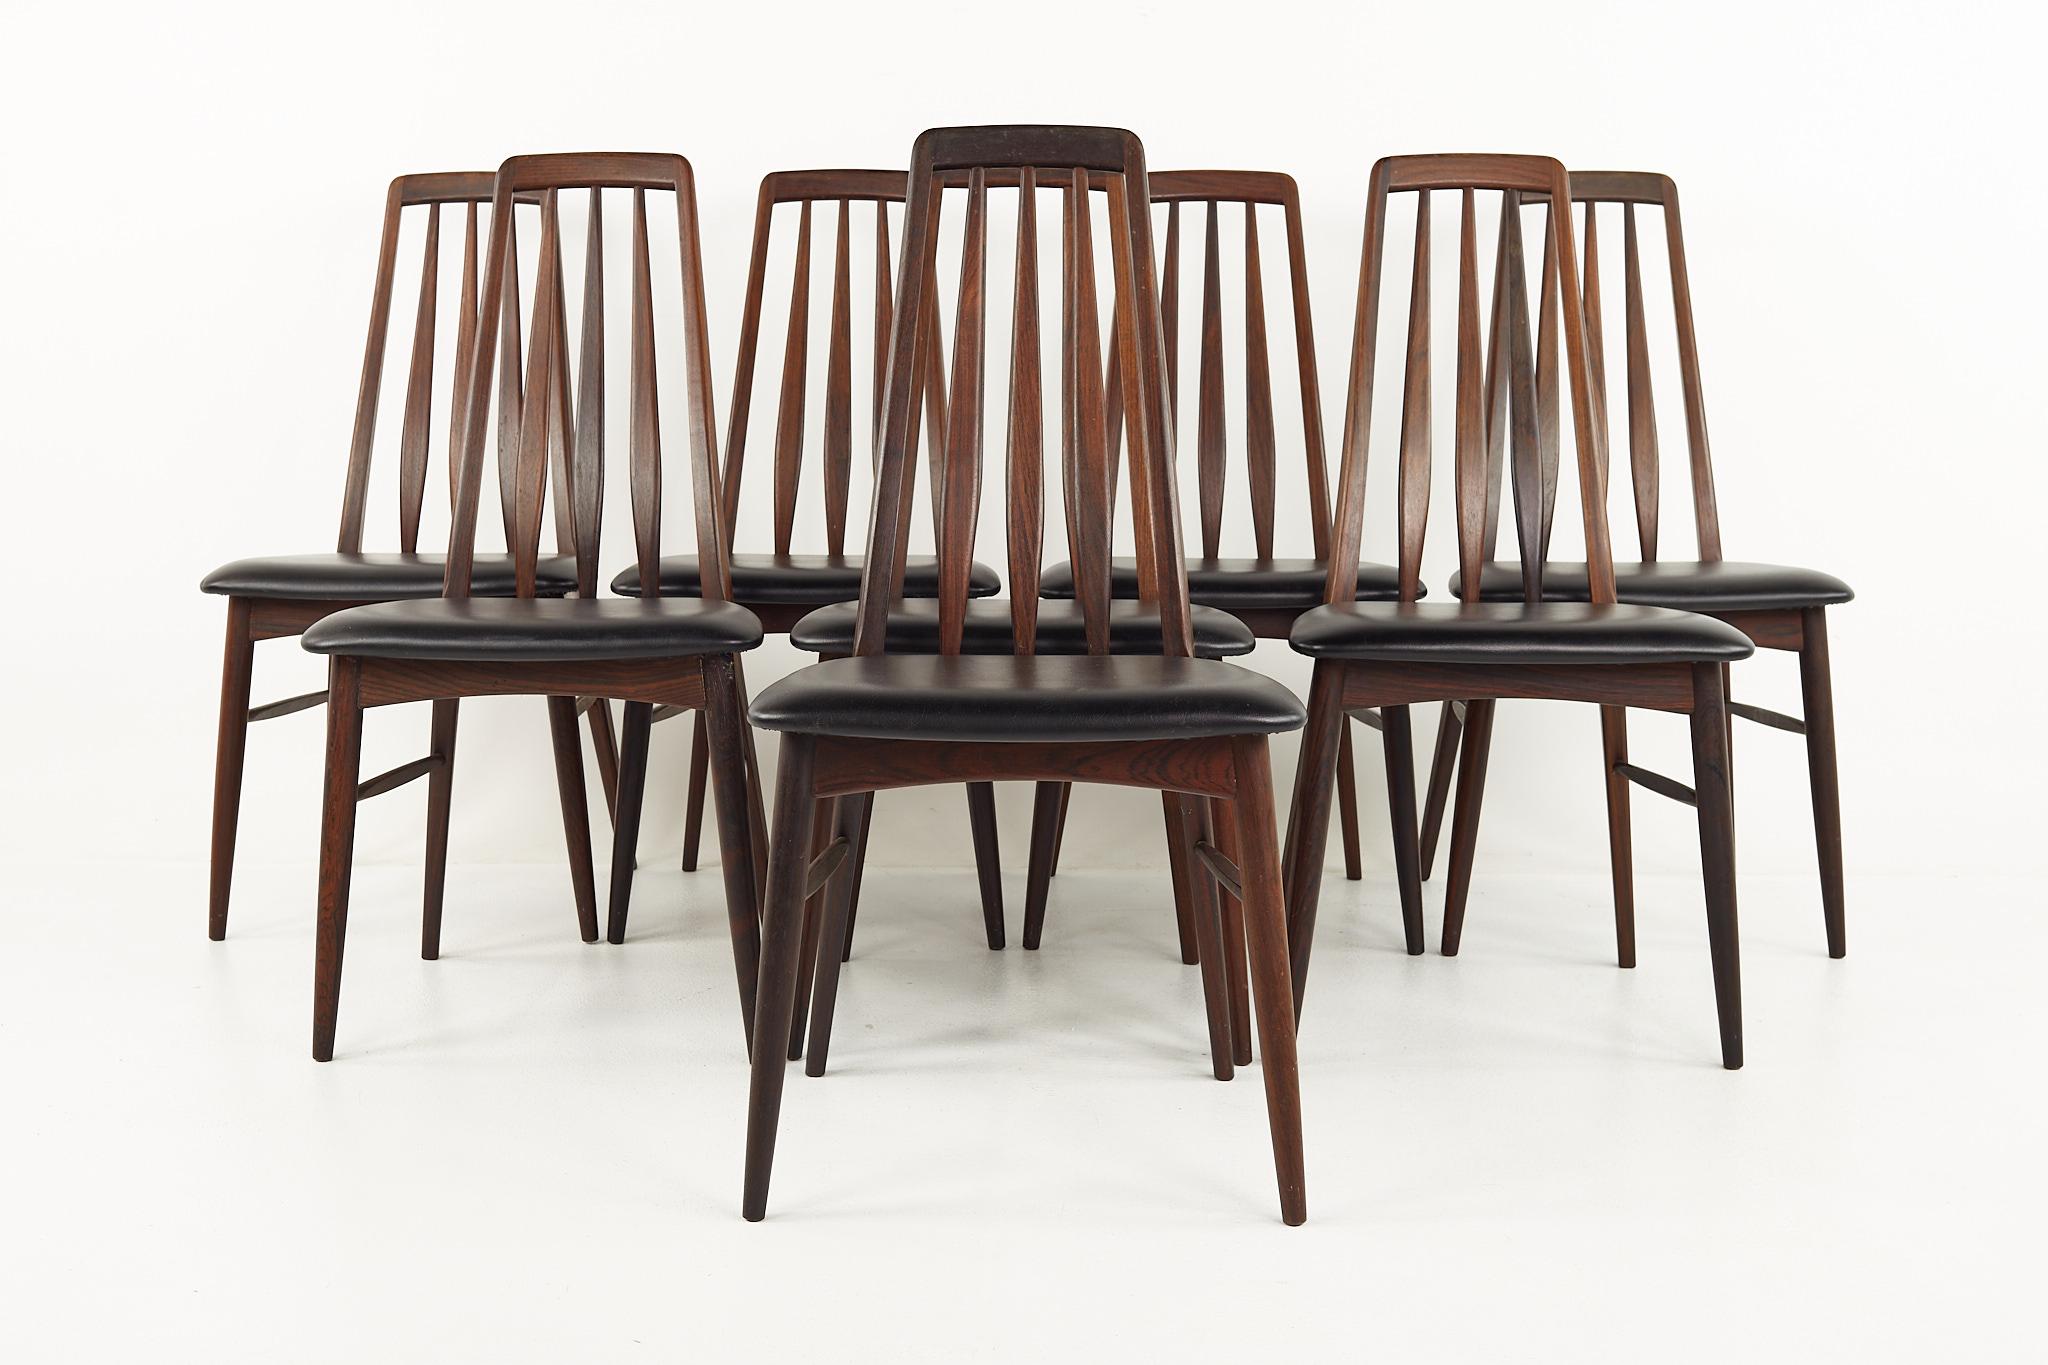 Niels Koefoed Eva Mid Century Danish Rosewood Dining Chairs - Set of 8

Each chair measures: 18.5 wide x 17 deep x 37.5 high, with a seat height of 18.5 inches

All pieces of furniture can be had in what we call restored vintage condition. That